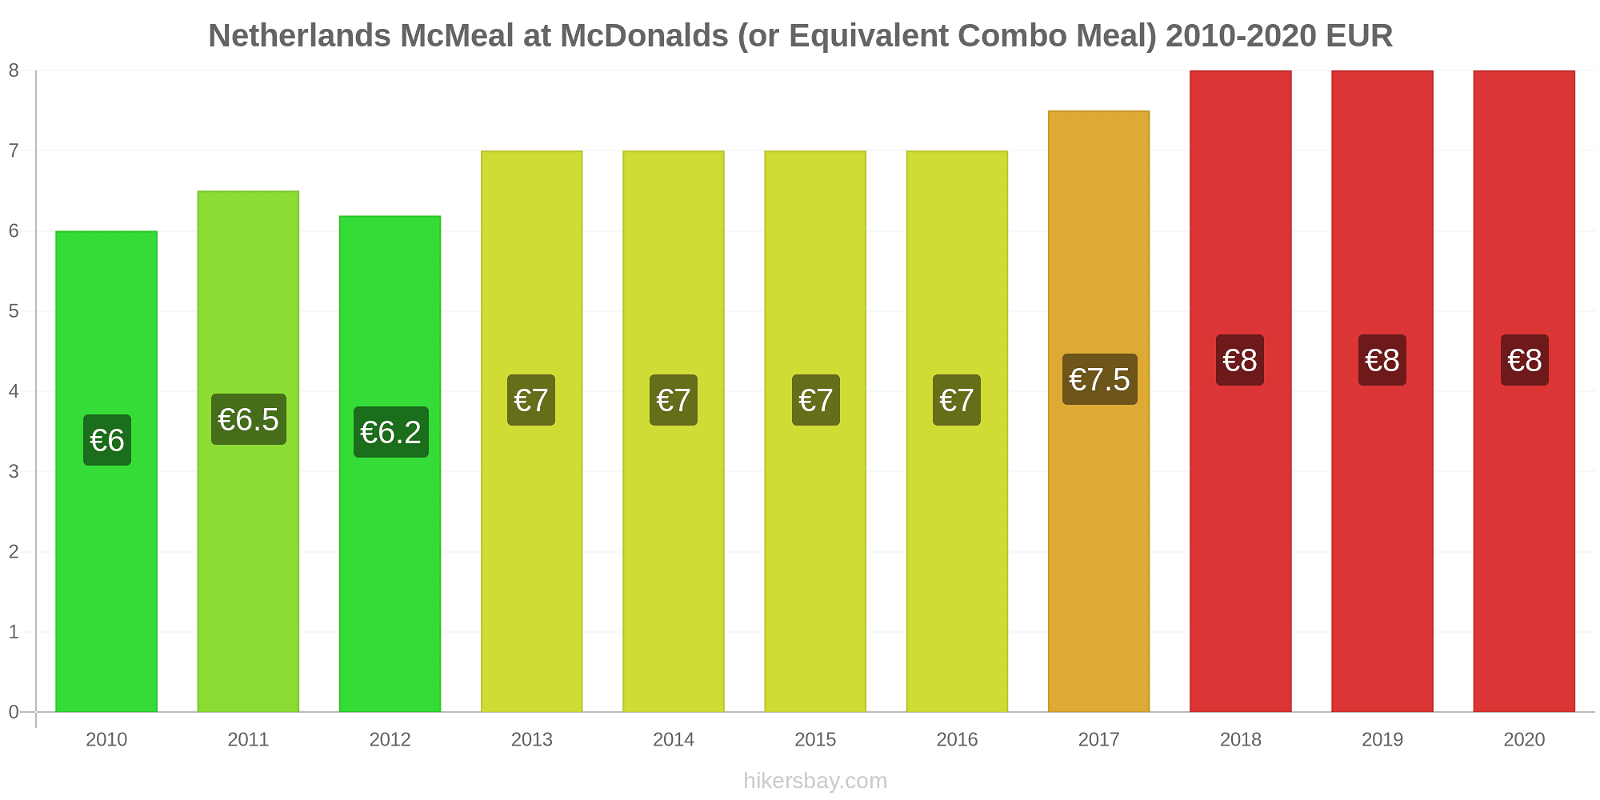 Netherlands price changes McMeal at McDonalds (or Equivalent Combo Meal) hikersbay.com